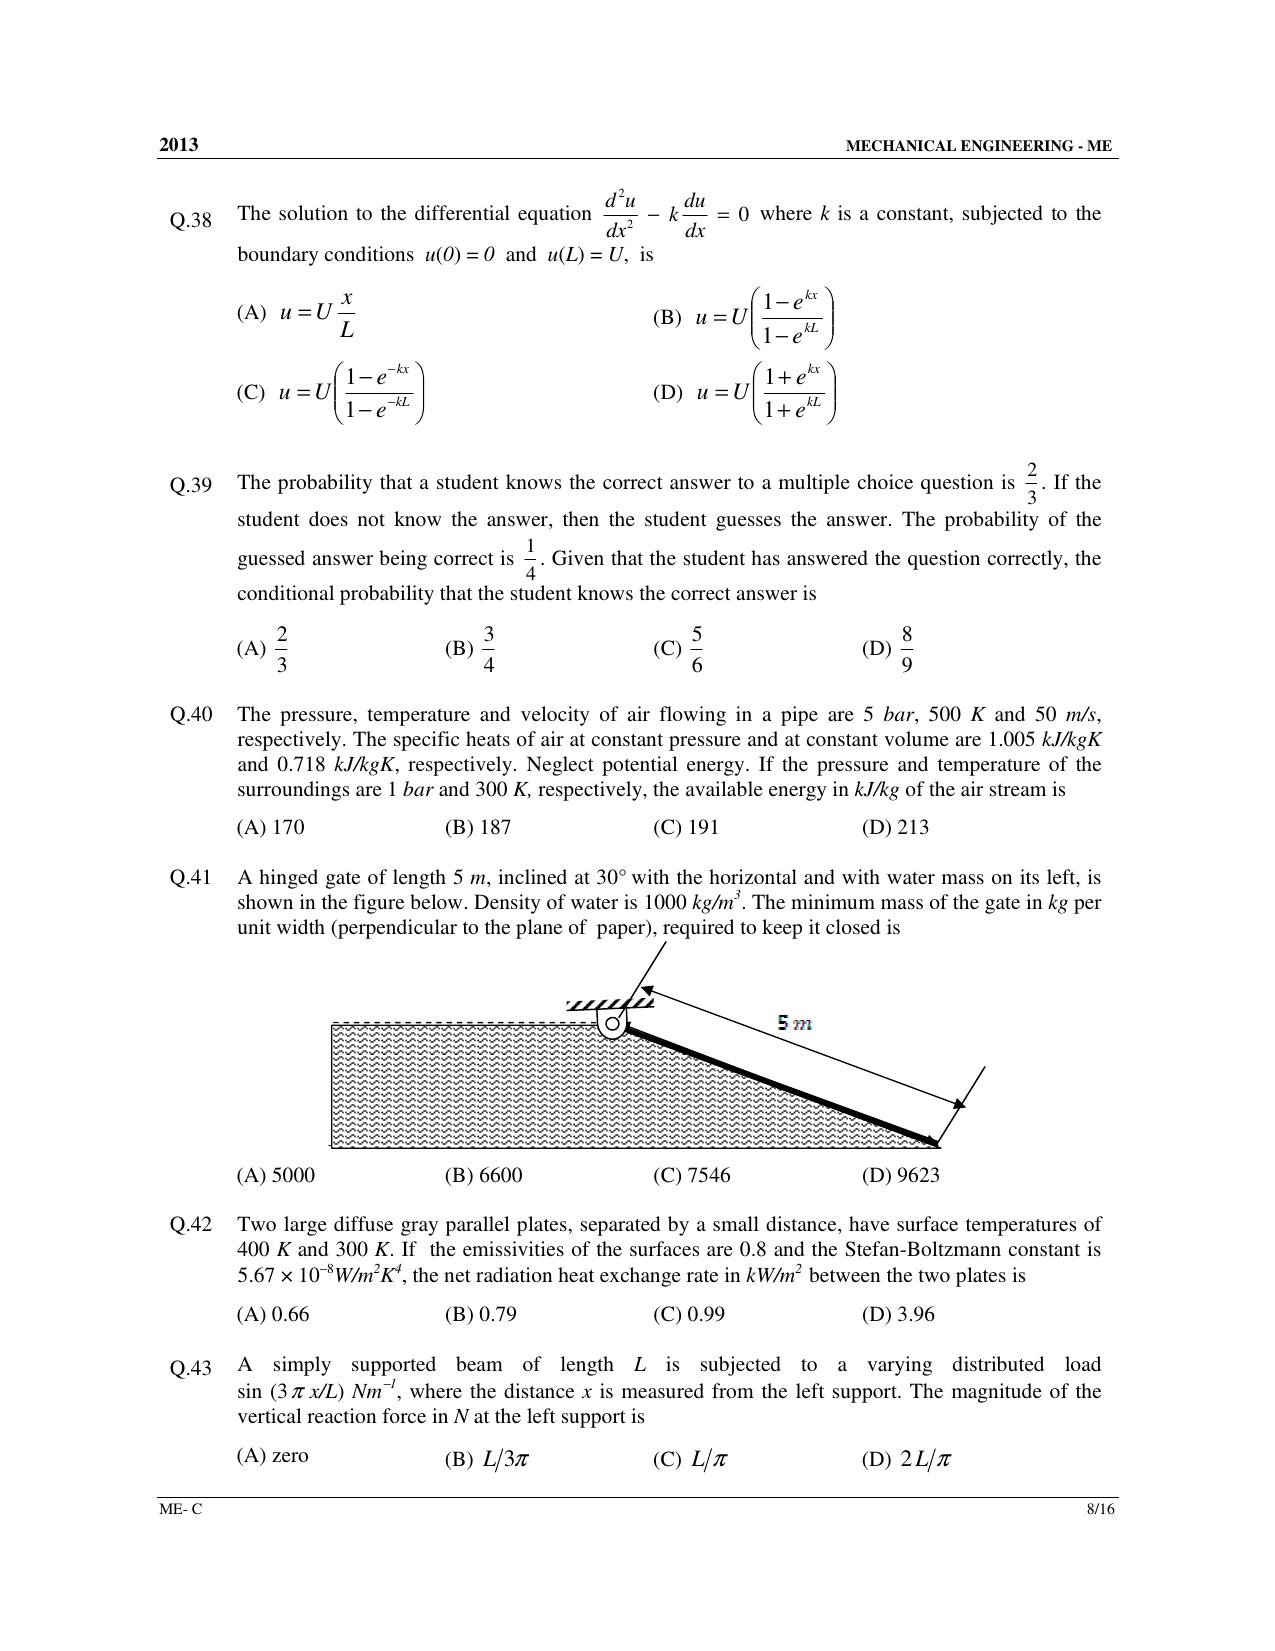 GATE 2013 Mechanical Engineering (ME) Question Paper with Answer Key - Page 37